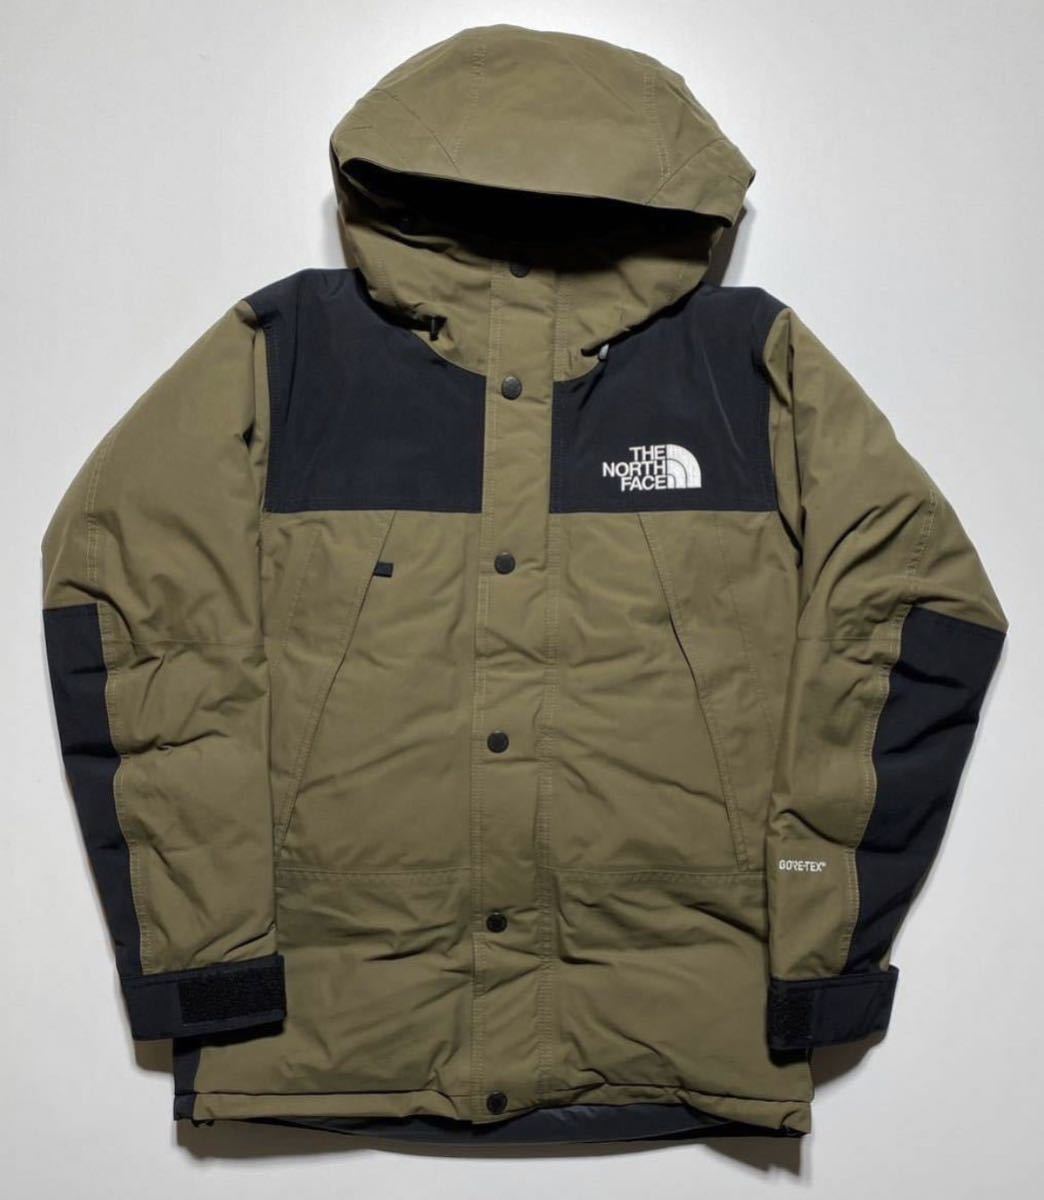 【S】THE NORTH FACE Mountain Down Jacket ザノースフェイス マウンテン ダウン ジャケット GORE-TEX (ND91837) R1937